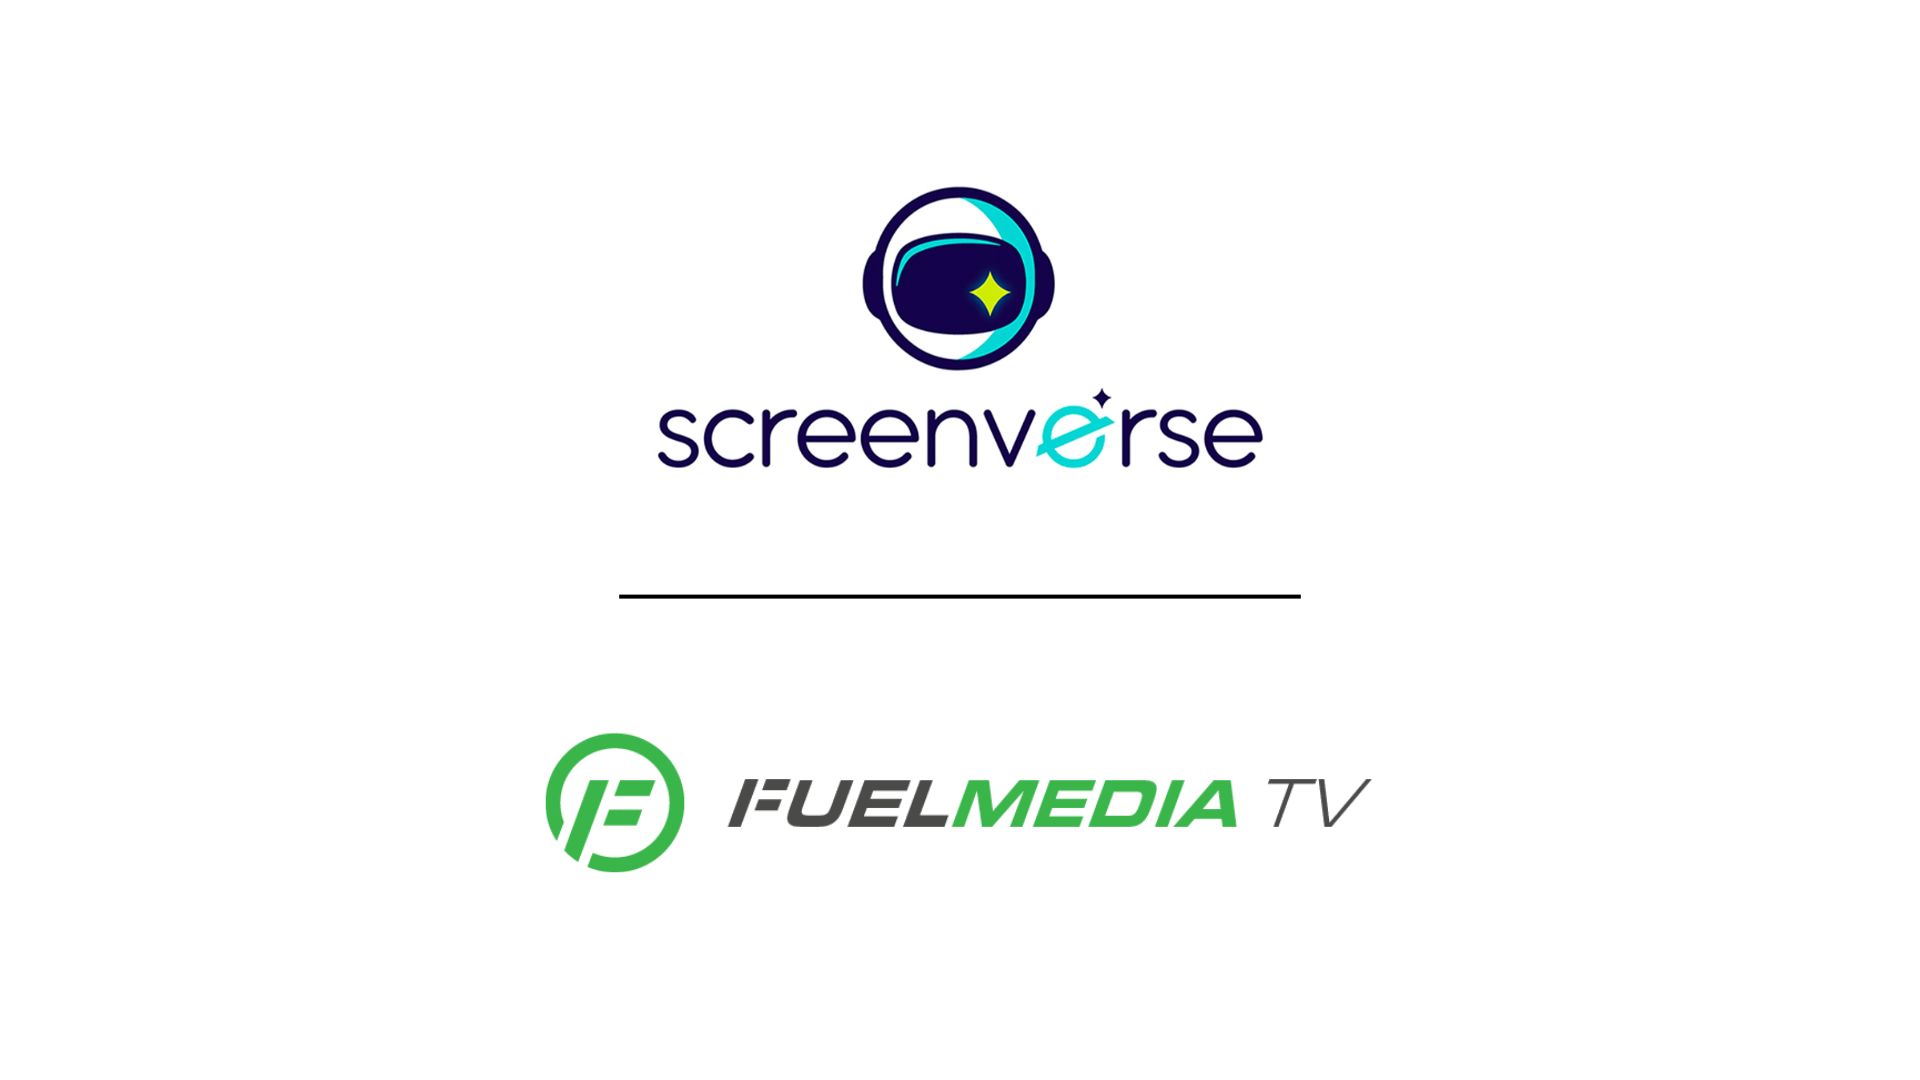 Screenverse Partners with FuelMedia TV, Expanding Reach to Gas Station Venues